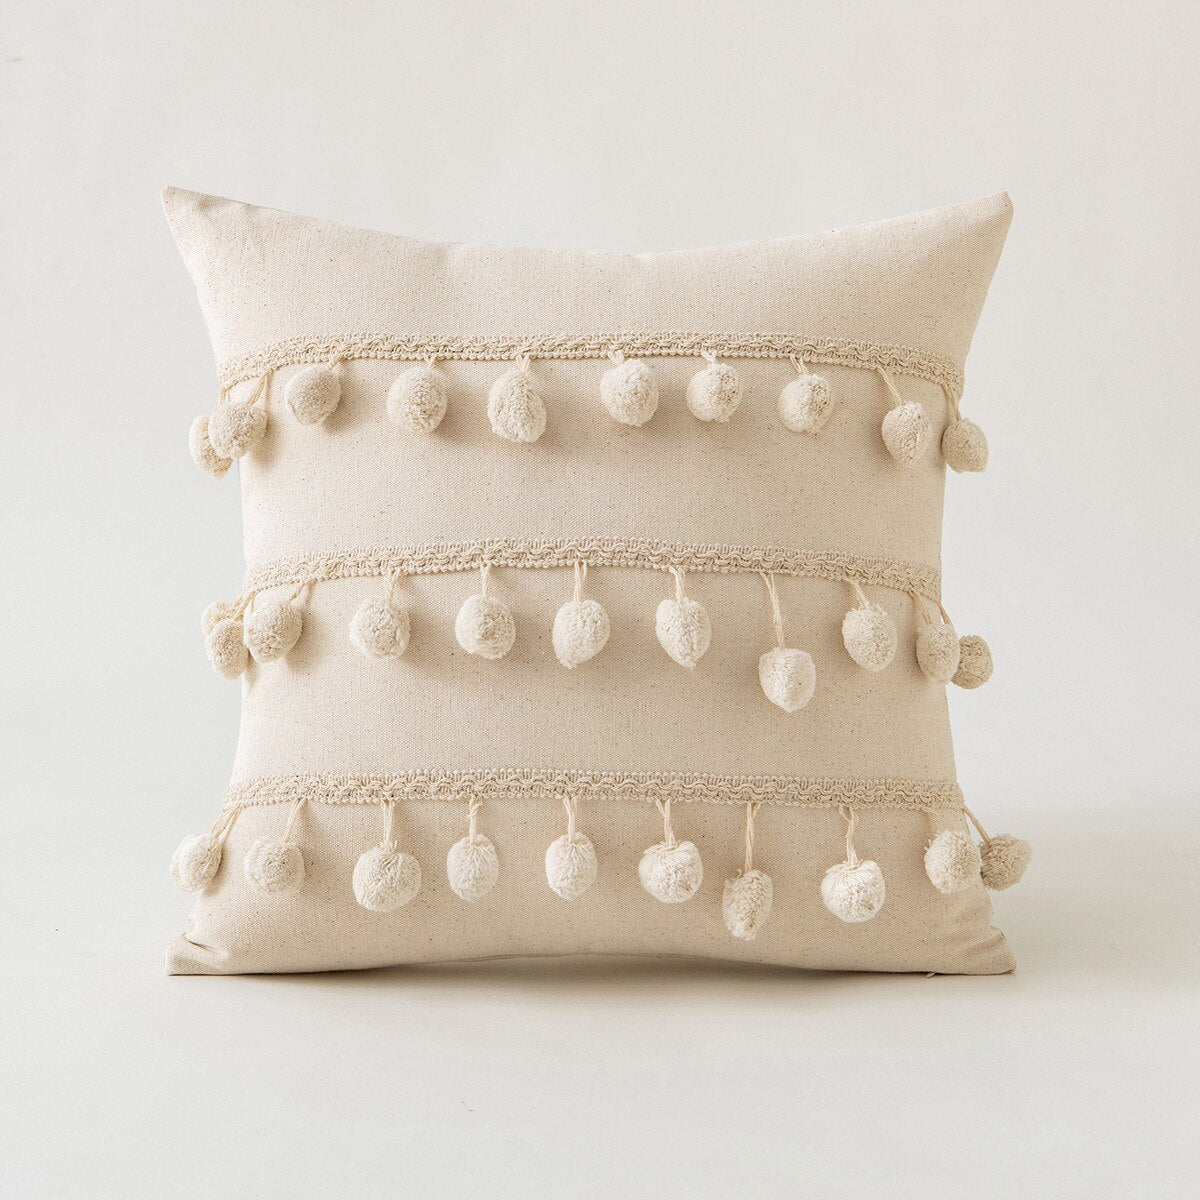 Ivory Cushion cover 45x45cm/30x50cm Pillow Cover Pompom Tassles Home Decoration Living Room Sofa Couch Bedroom Chair Seasonable - kmtell.com